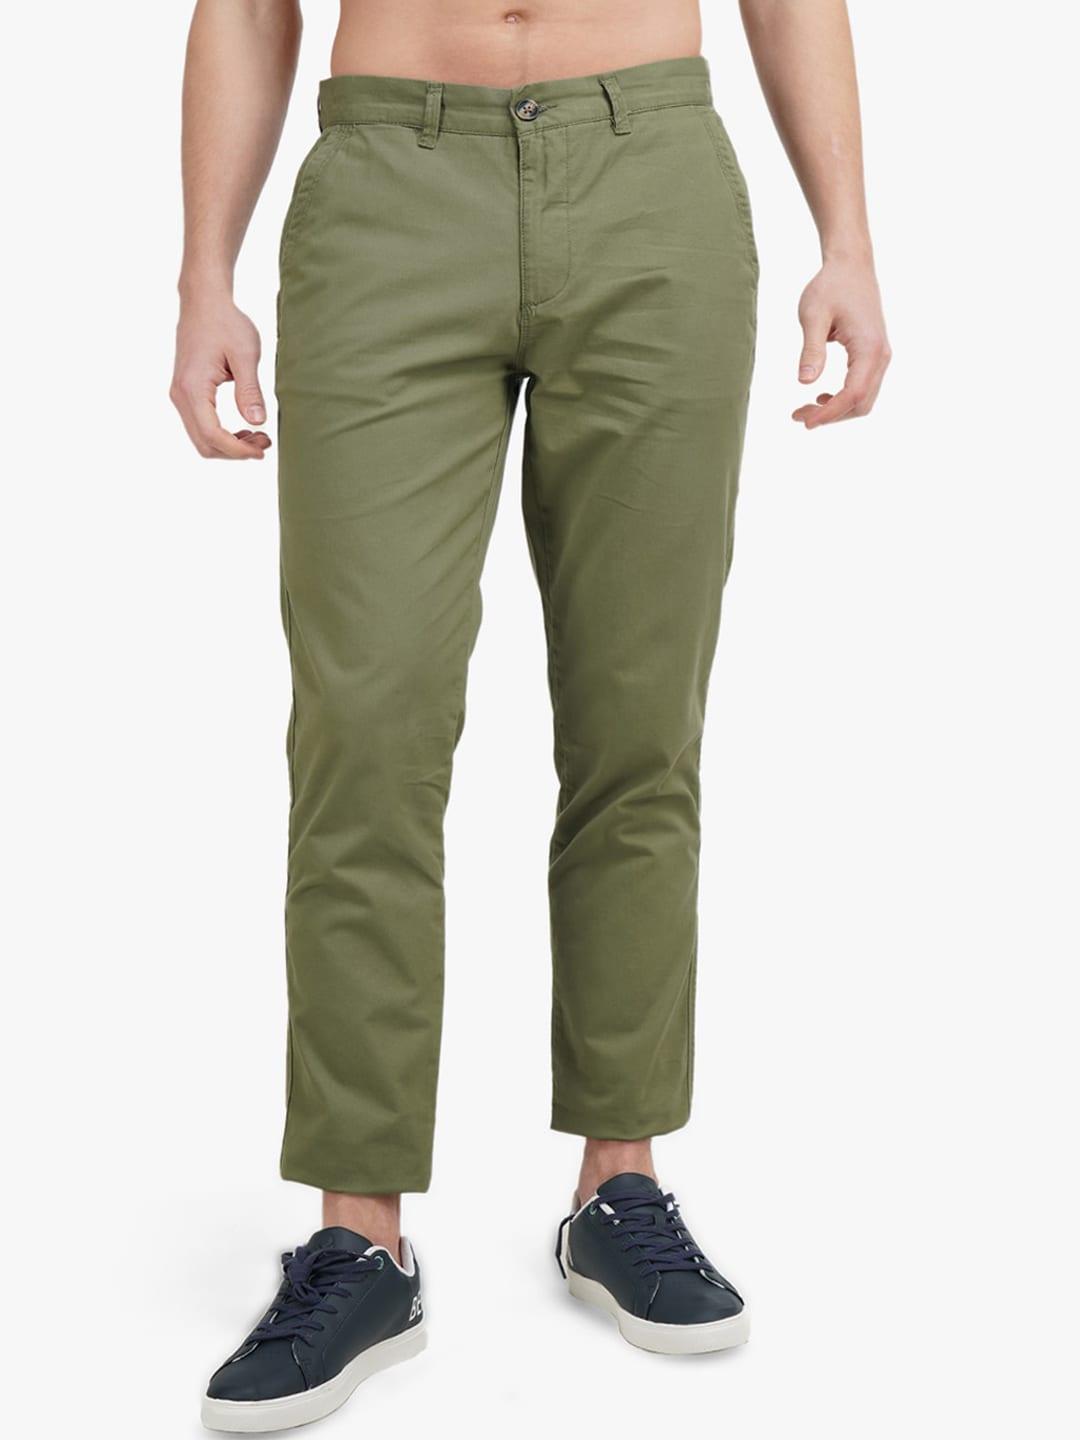 united-colors-of-benetton-men-olive-green-slim-fit-chinos-trousers